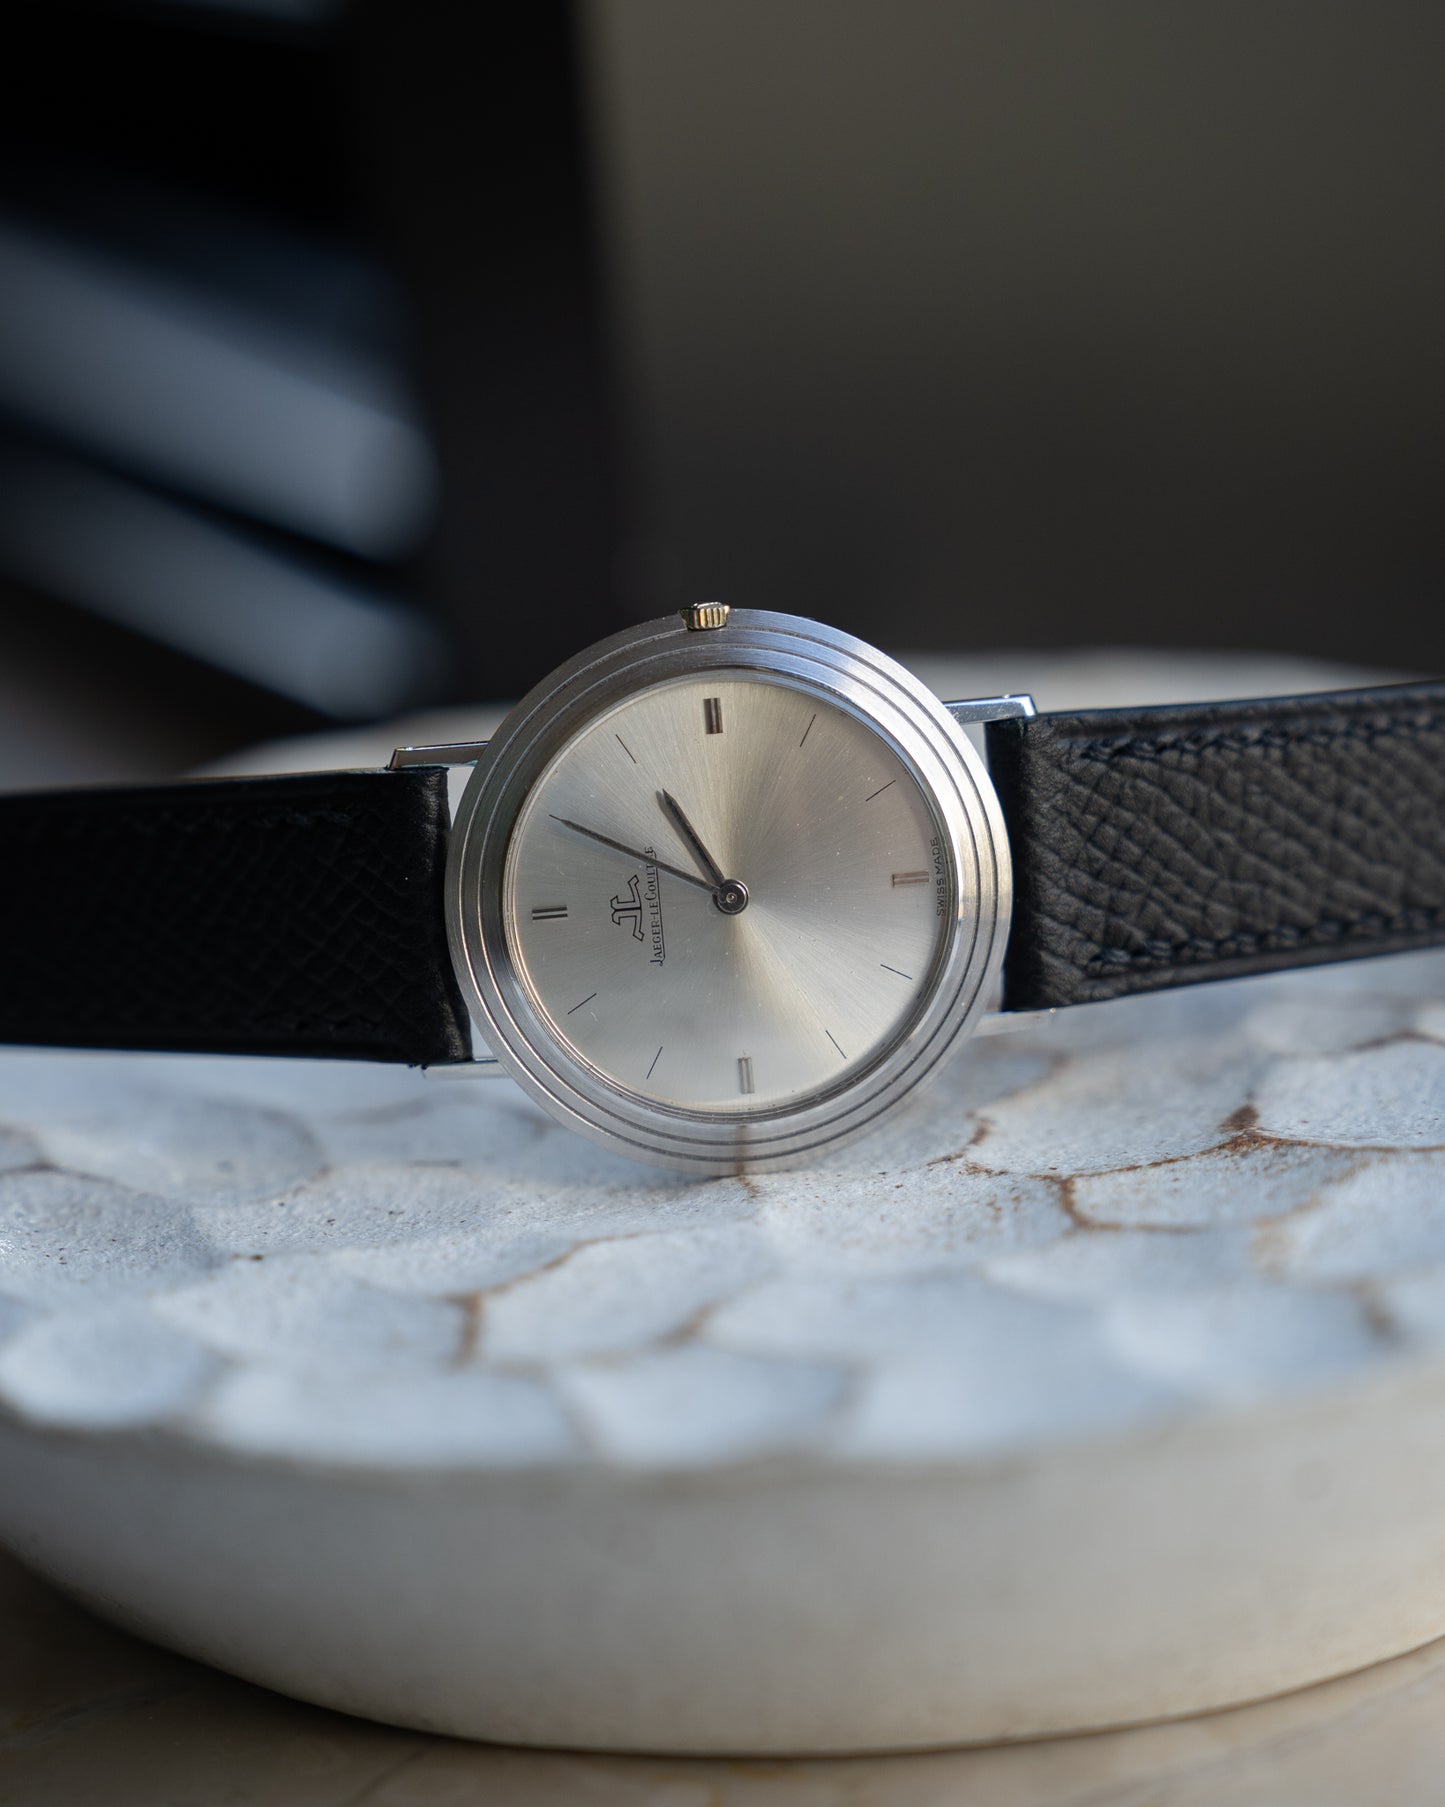 Jaeger-LeCoultre White Gold Ultra thin dress watch, Caliber P838 from 1970's